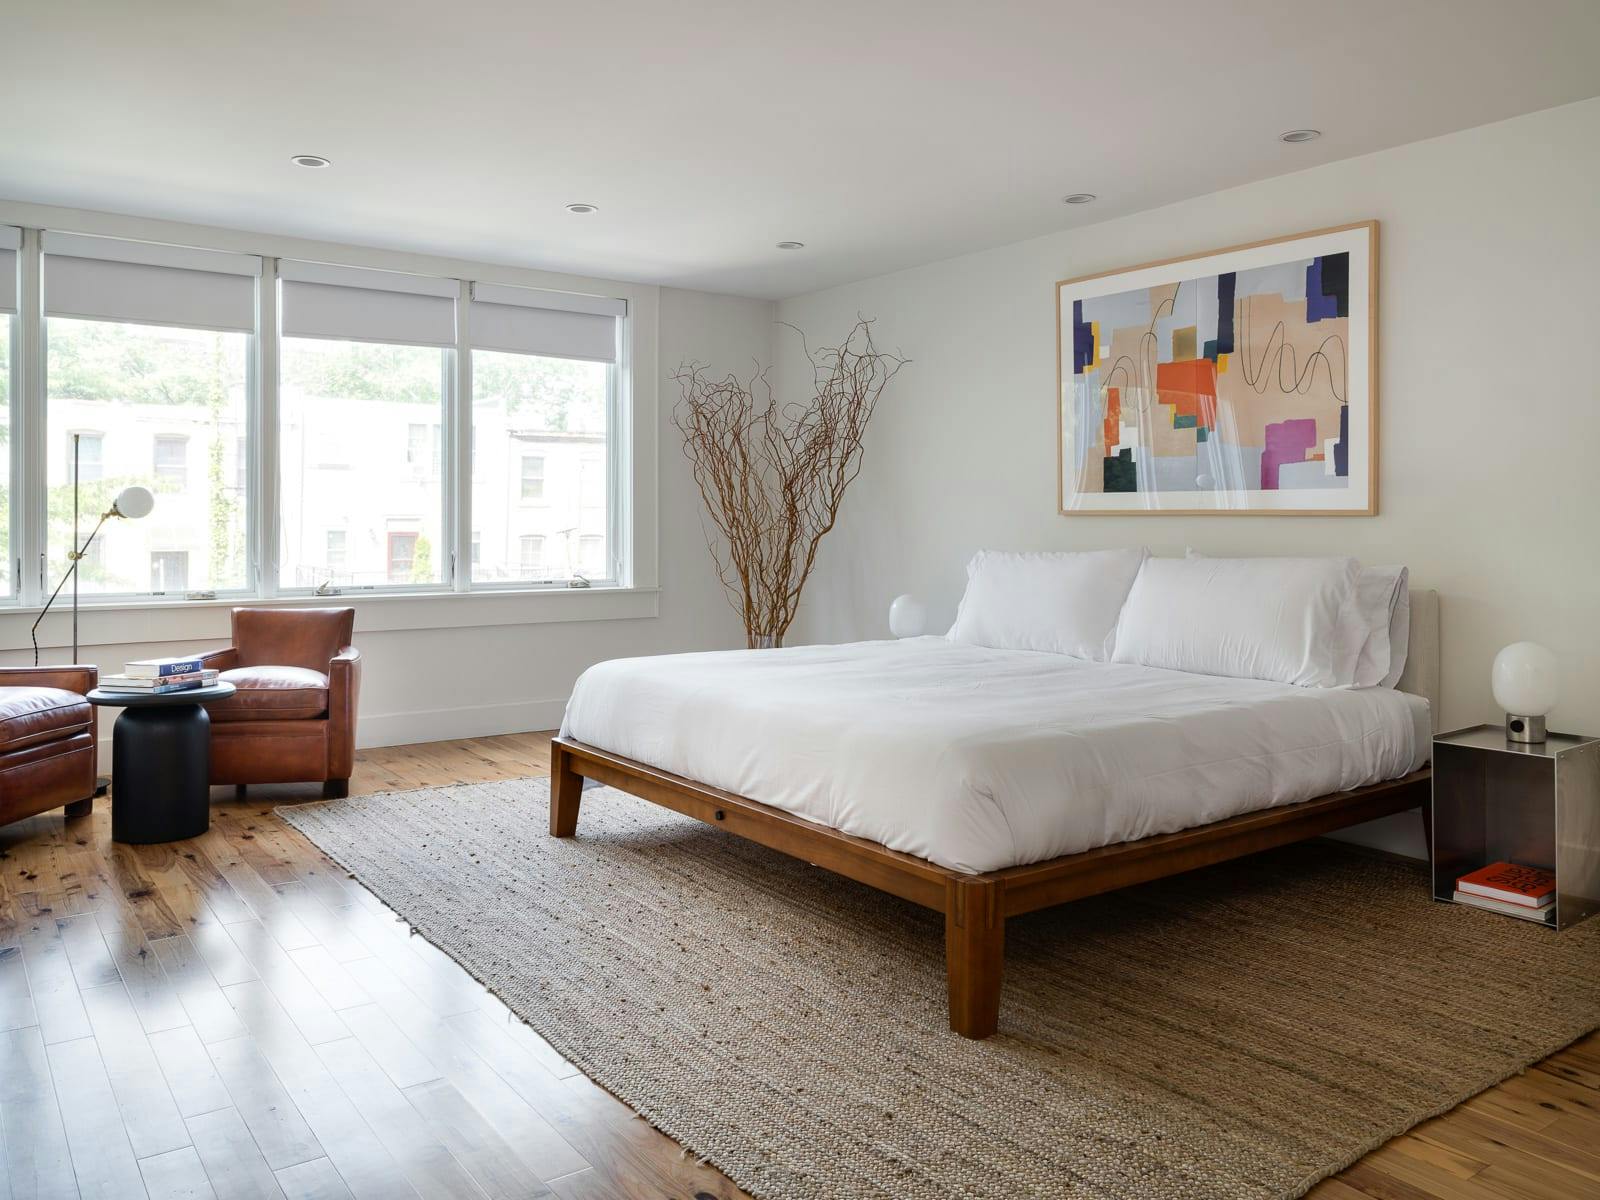 Large King Bedroom with Artwork, Dried Plants, Leather Arm Chairs and Side Table facing large windows and natural sunlight on jut rug